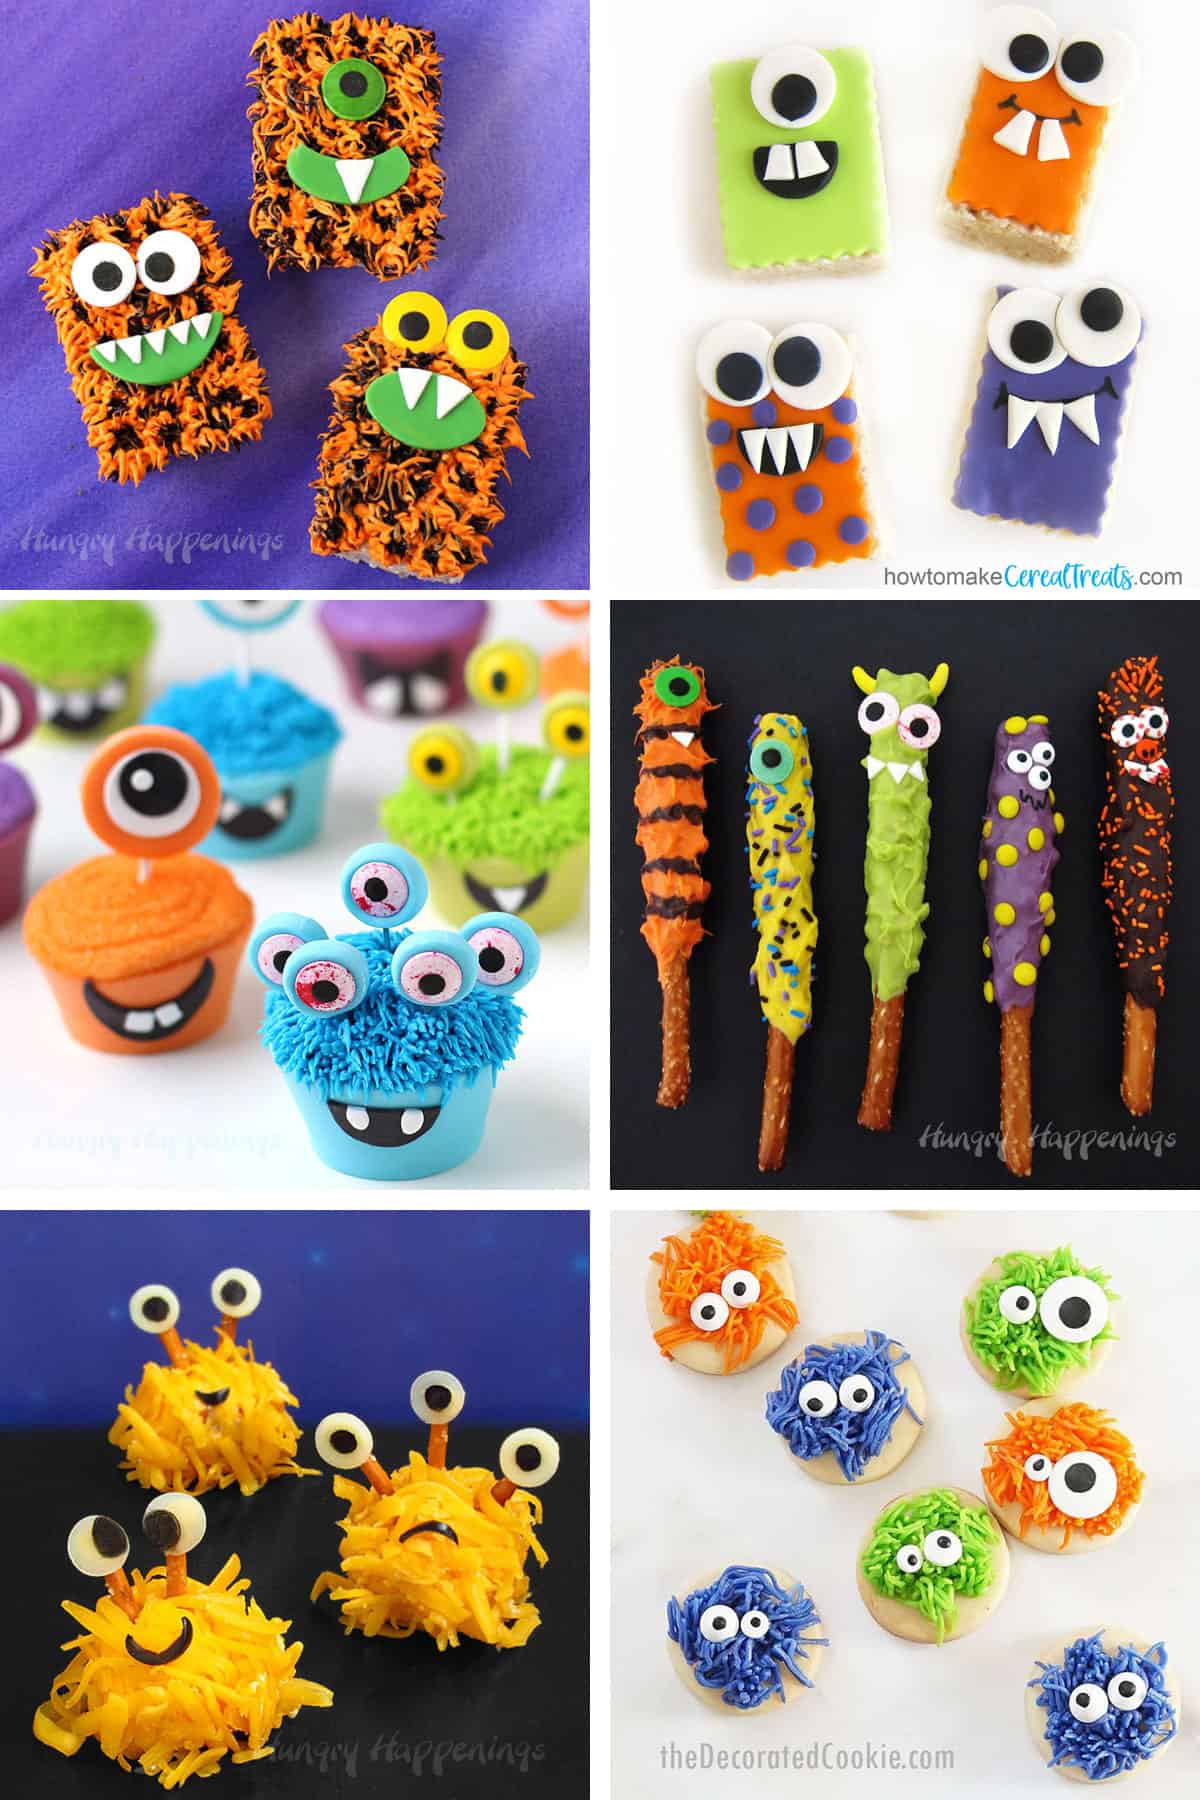 Monster desserts and snacks for Halloween including rice crispy treats, cupcakes, pretzels, cheese balls, and cookies.